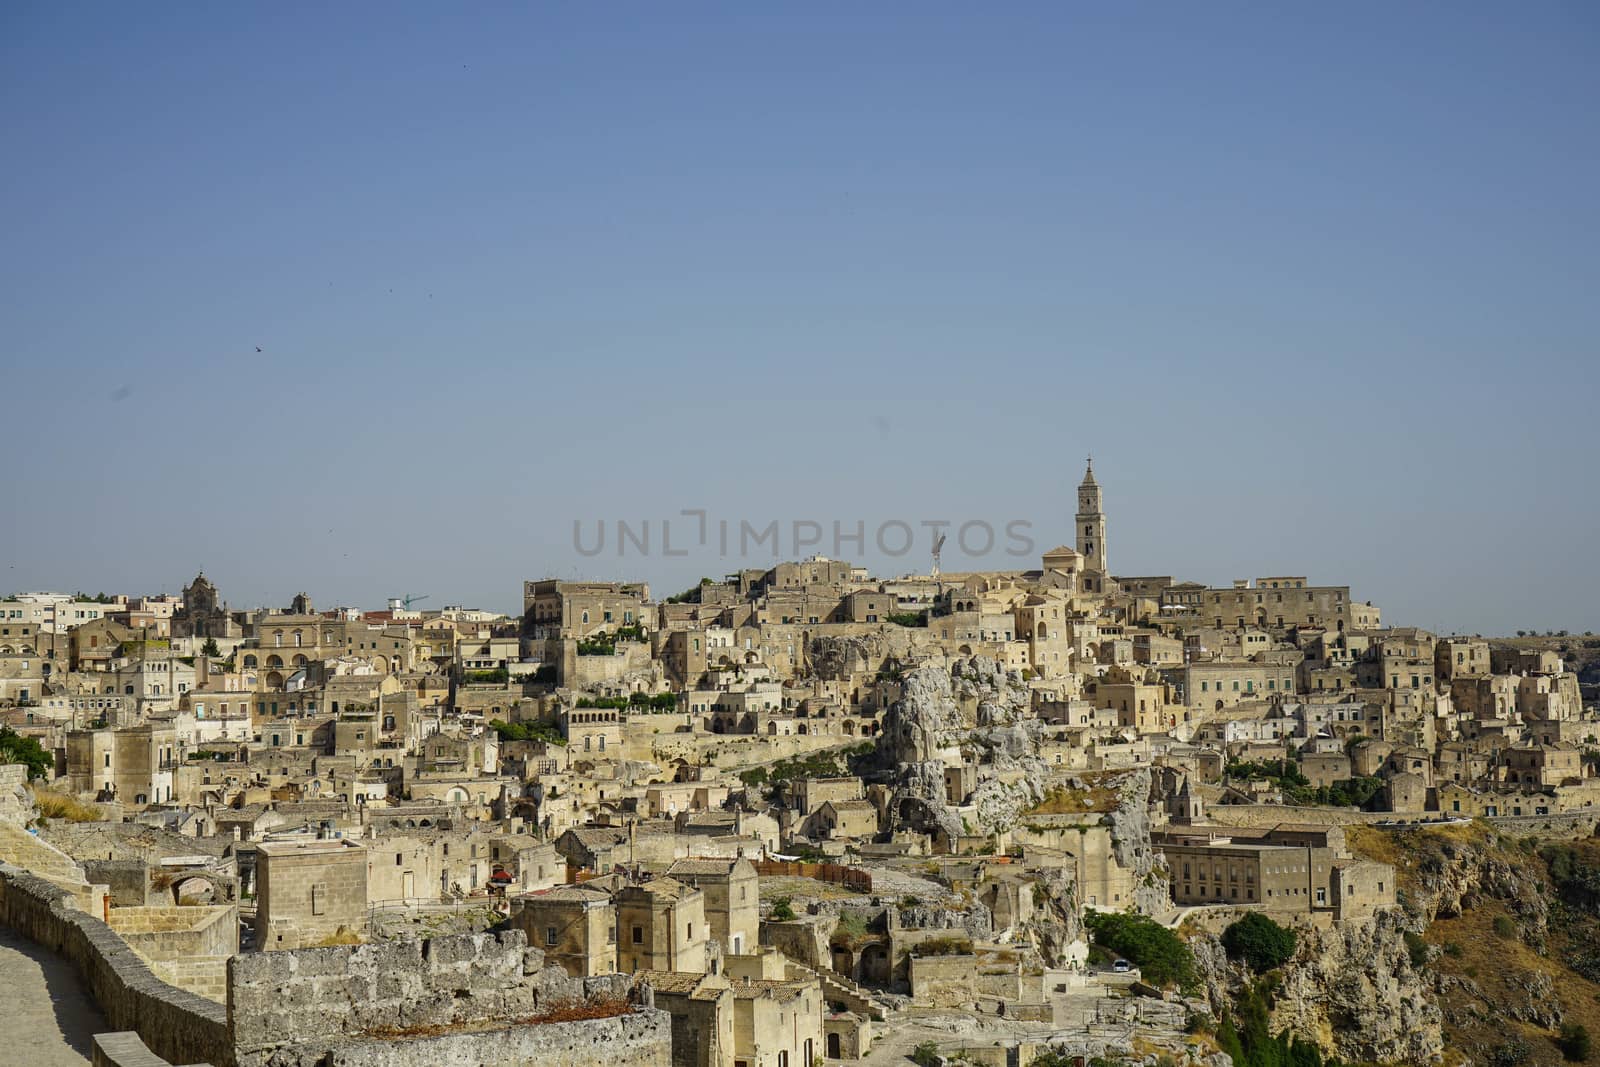 View on the Matera "stones" by cosca